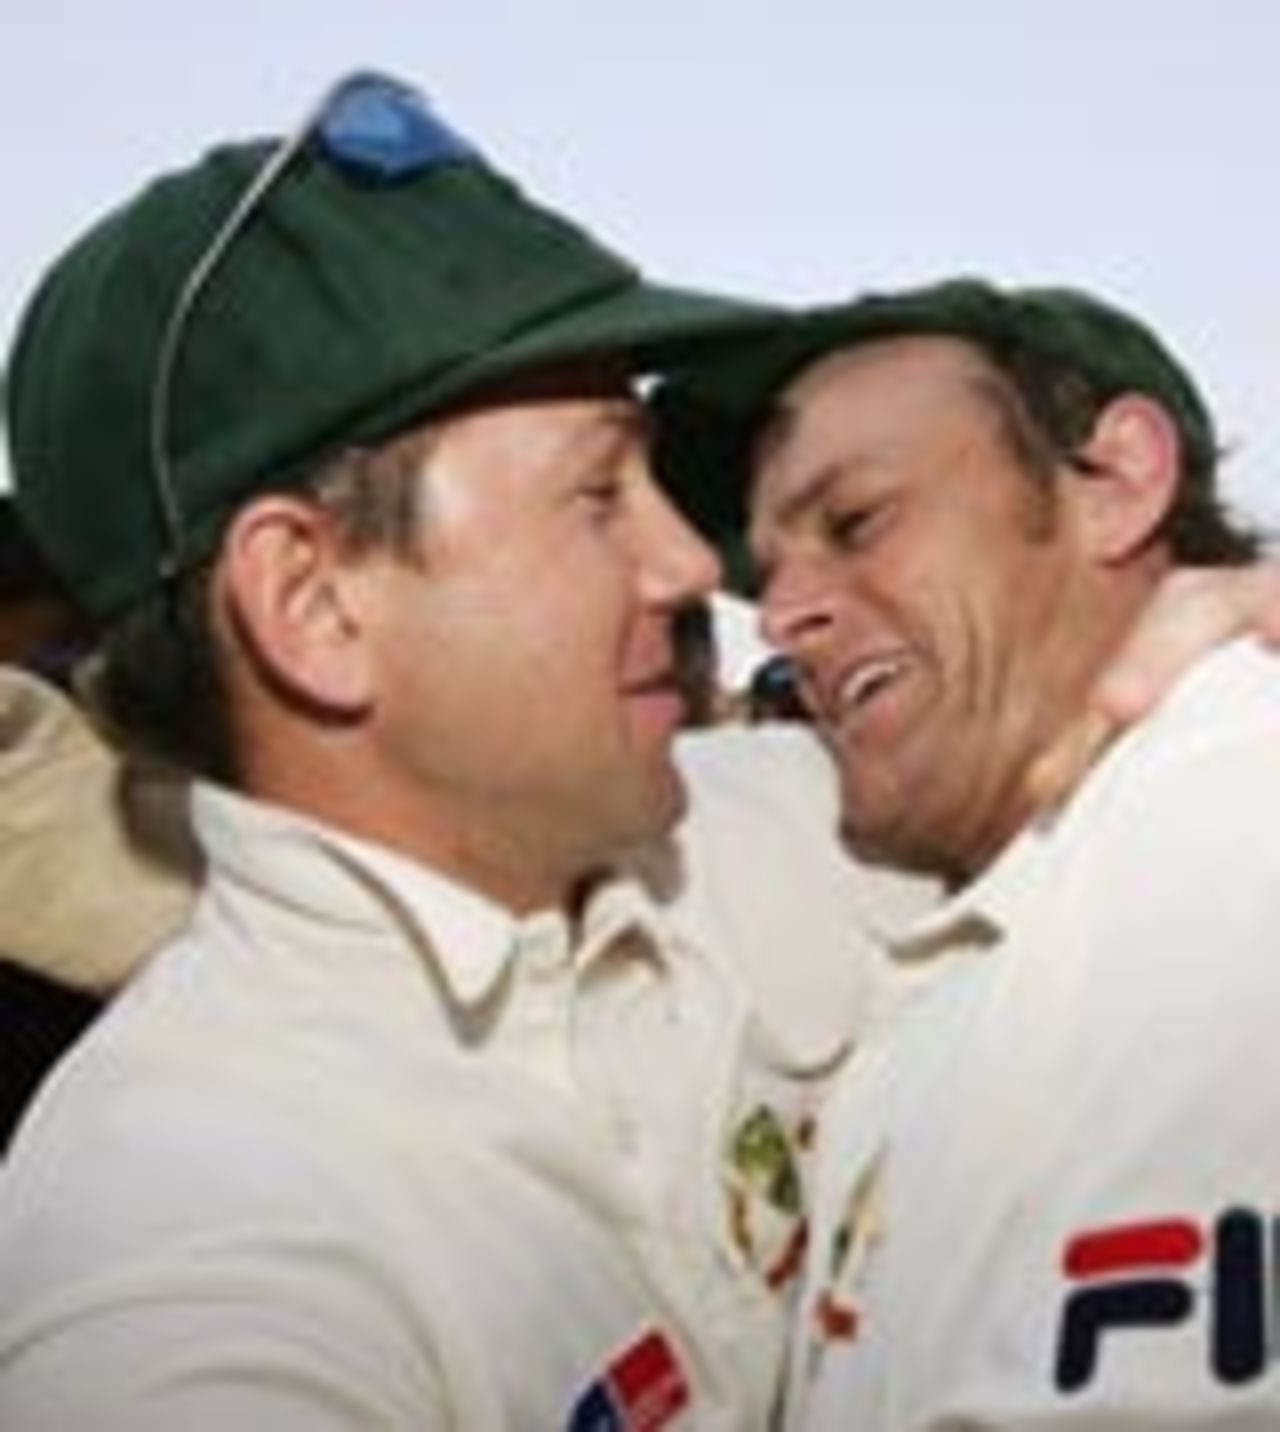 Ricky Ponting hugging Adam Gilchrist after the series win, India v Australia, 3rd Test, Nagpur, 4th day, October 29, 2004